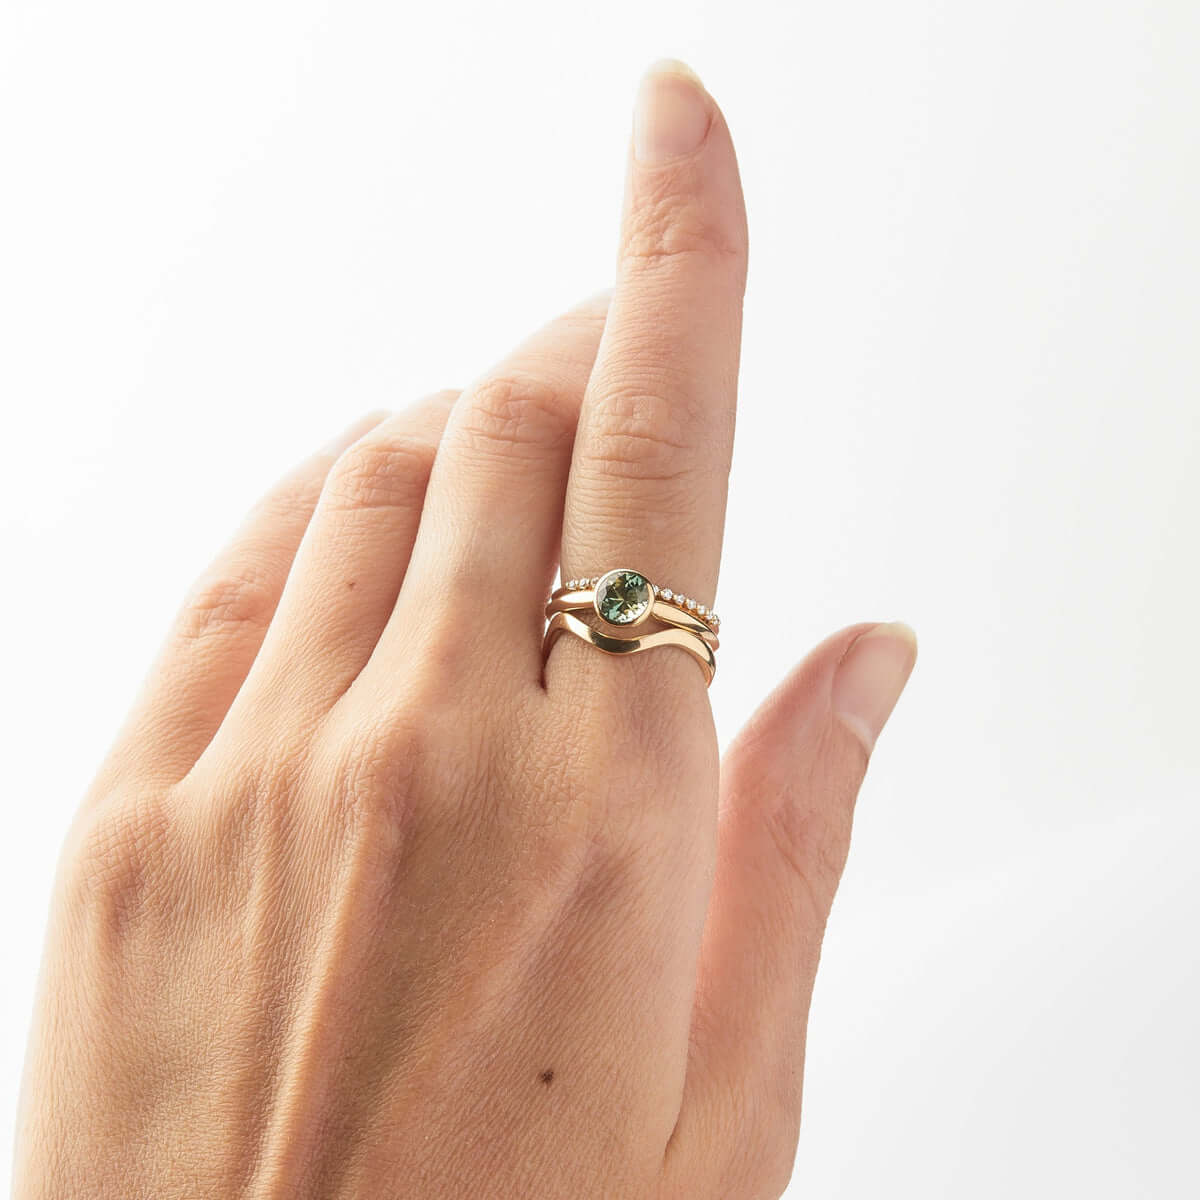 A hand model displaying 3 gold rings. The 1st a thin band covered in small diamonds. The 2nd a large green sapphire and 3rd a wavy gold band. 